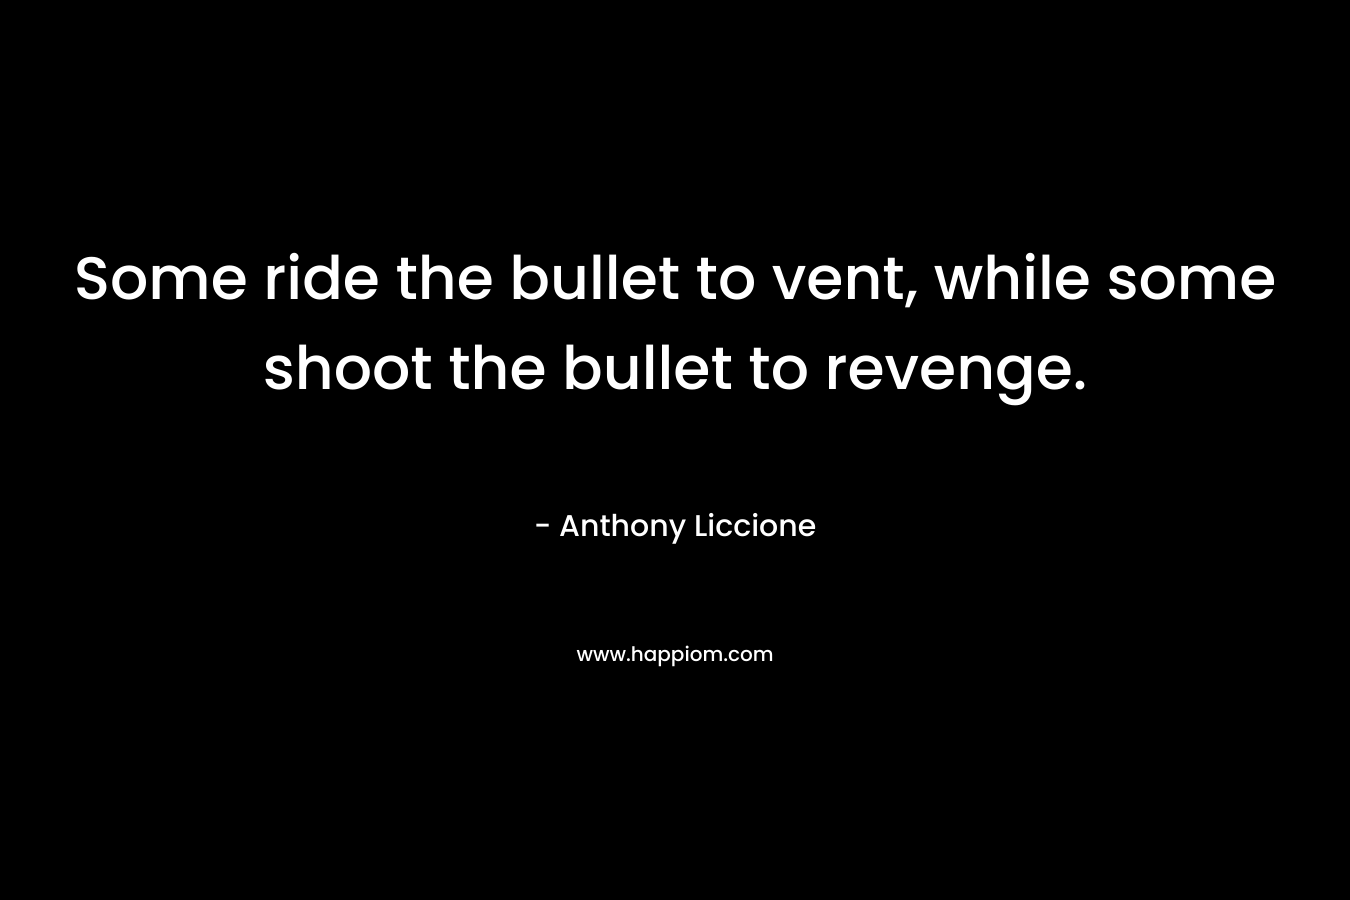 Some ride the bullet to vent, while some shoot the bullet to revenge.